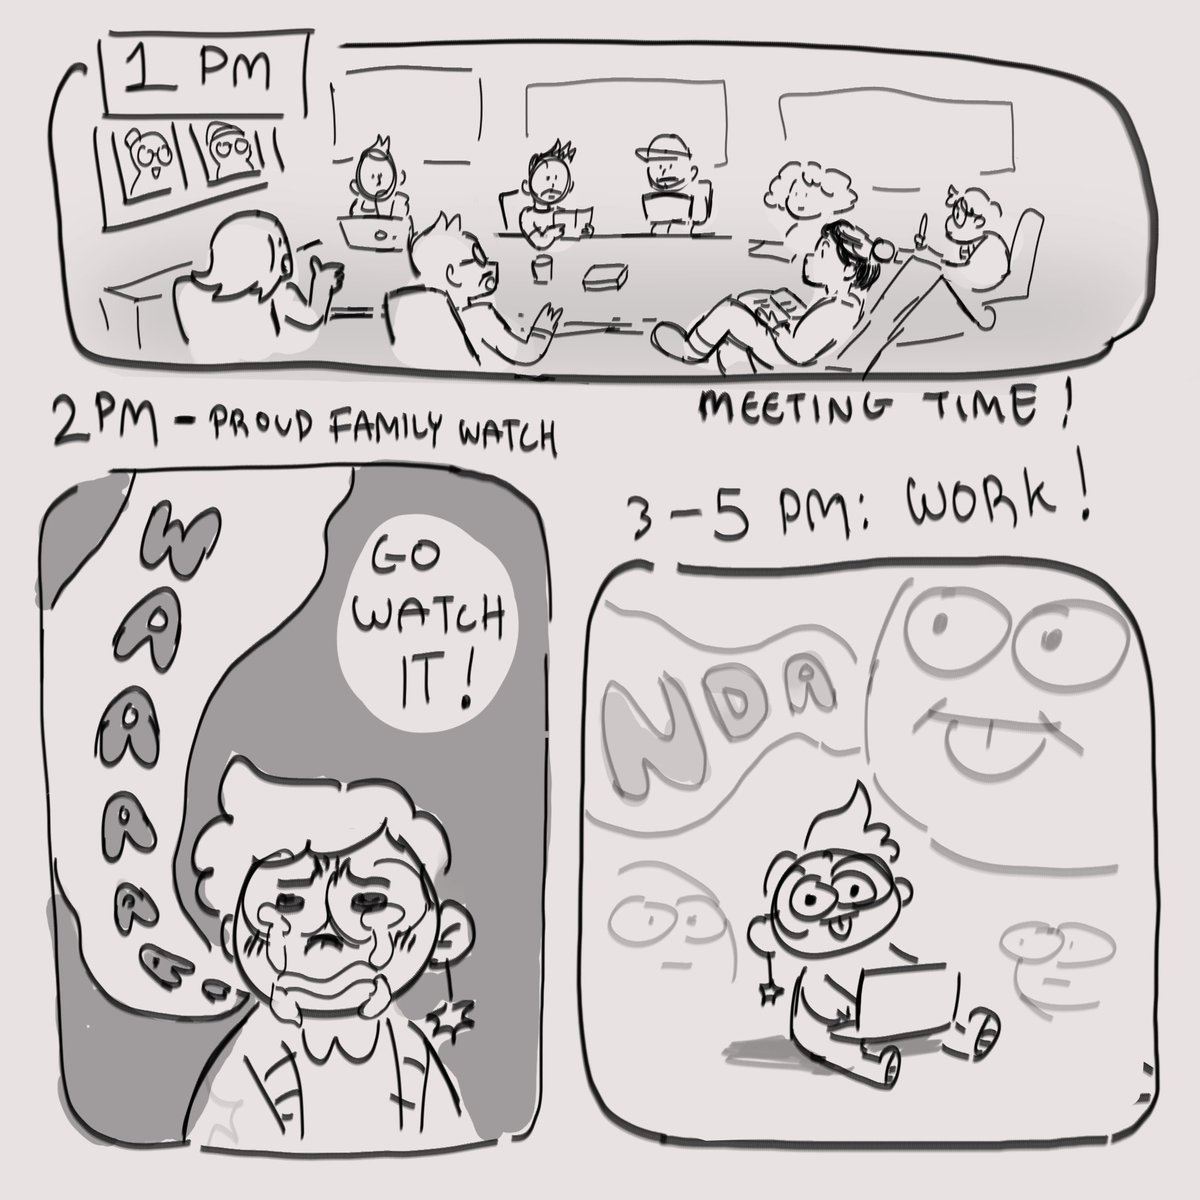 uploading more hourlies from yesterday!
11am-5pm 